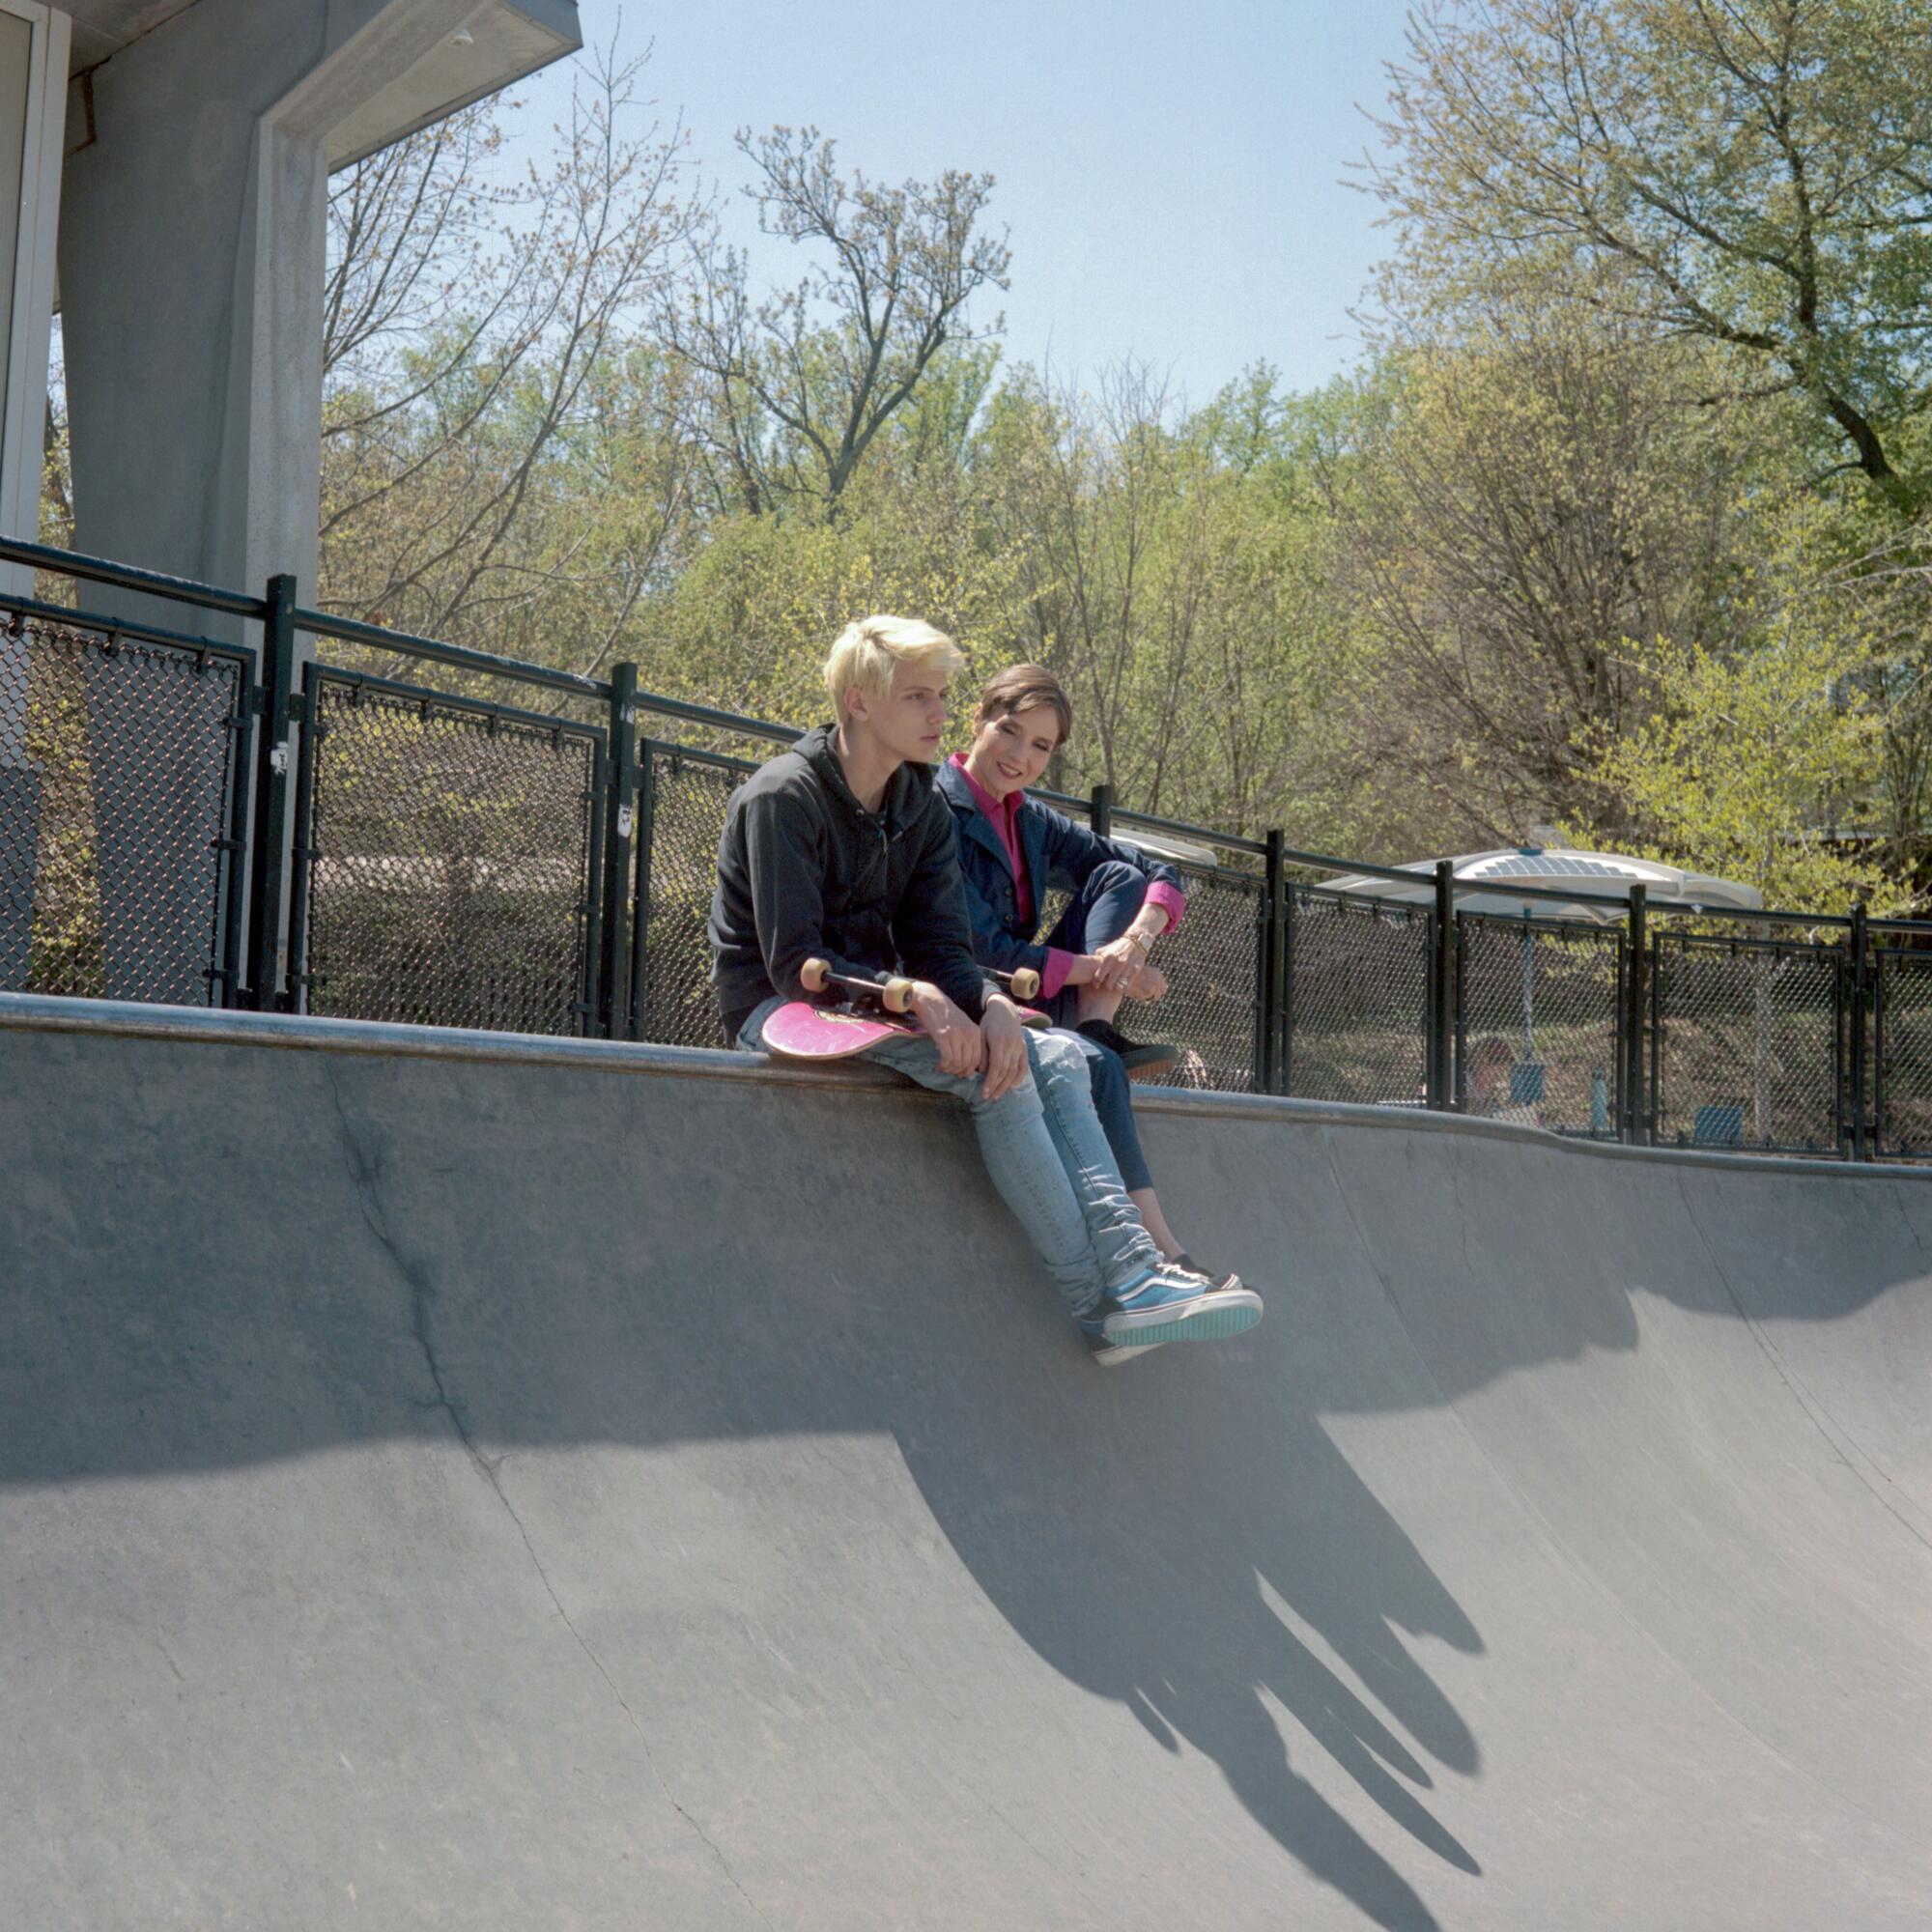 Catherine Herridge sits with her son Peter after a skateboarding session at the Powhatan Springs Skatepark in Arlington, Va.